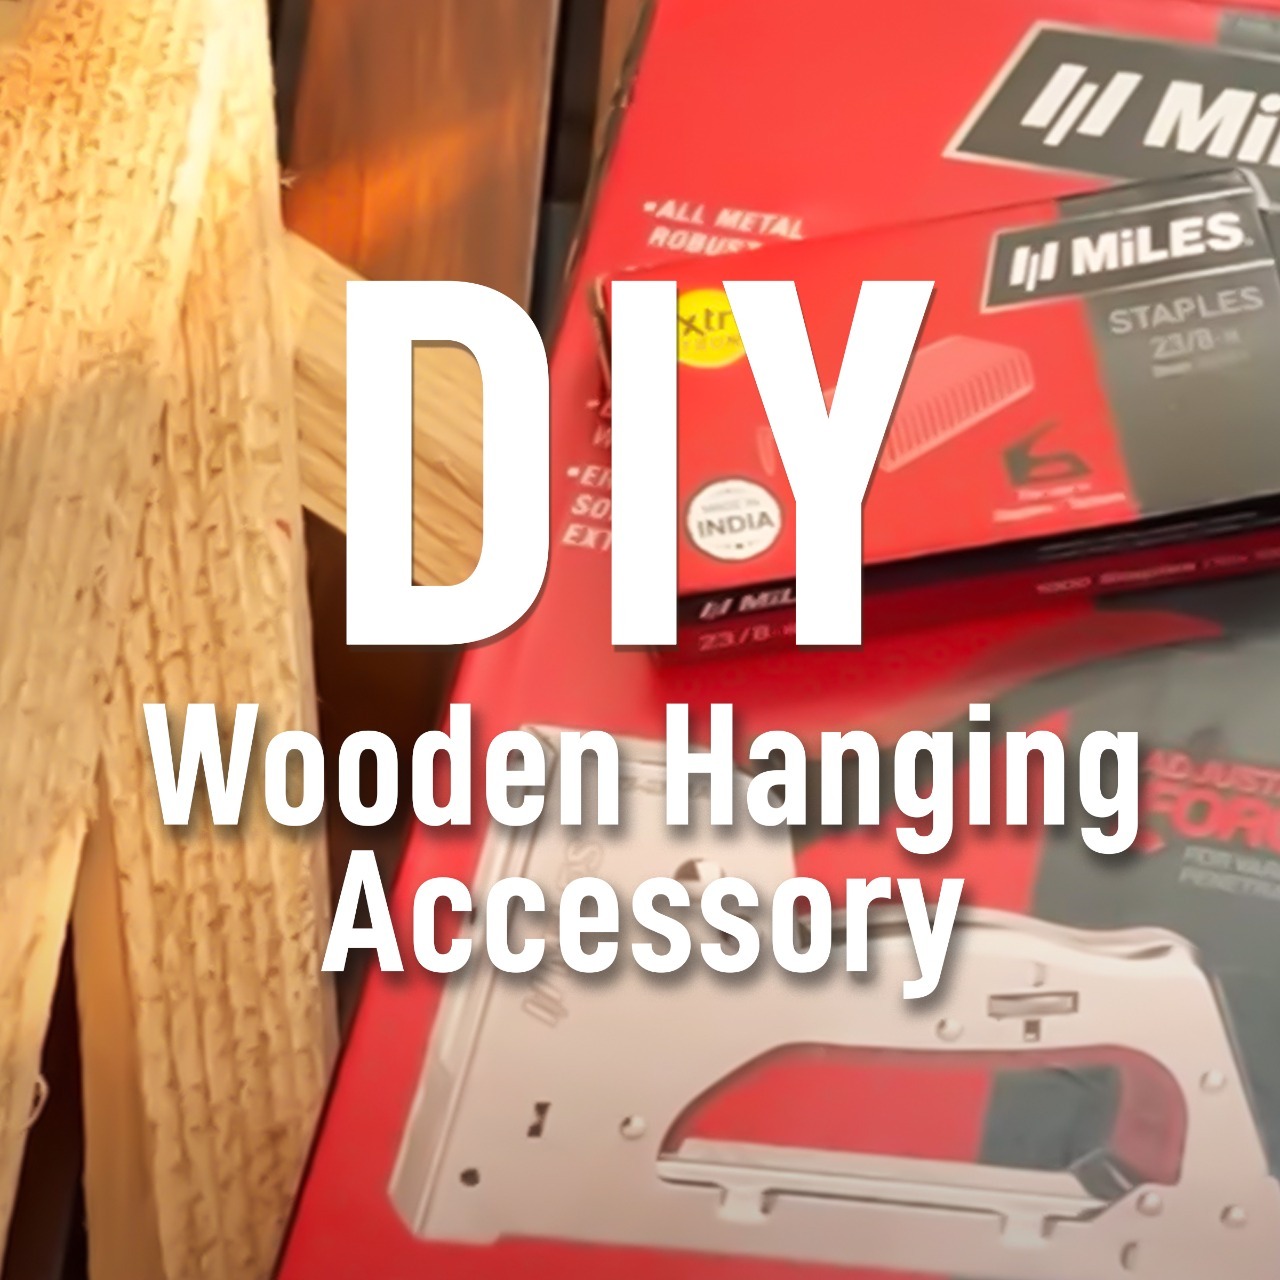 DIY - Wooden Hanging Accessory